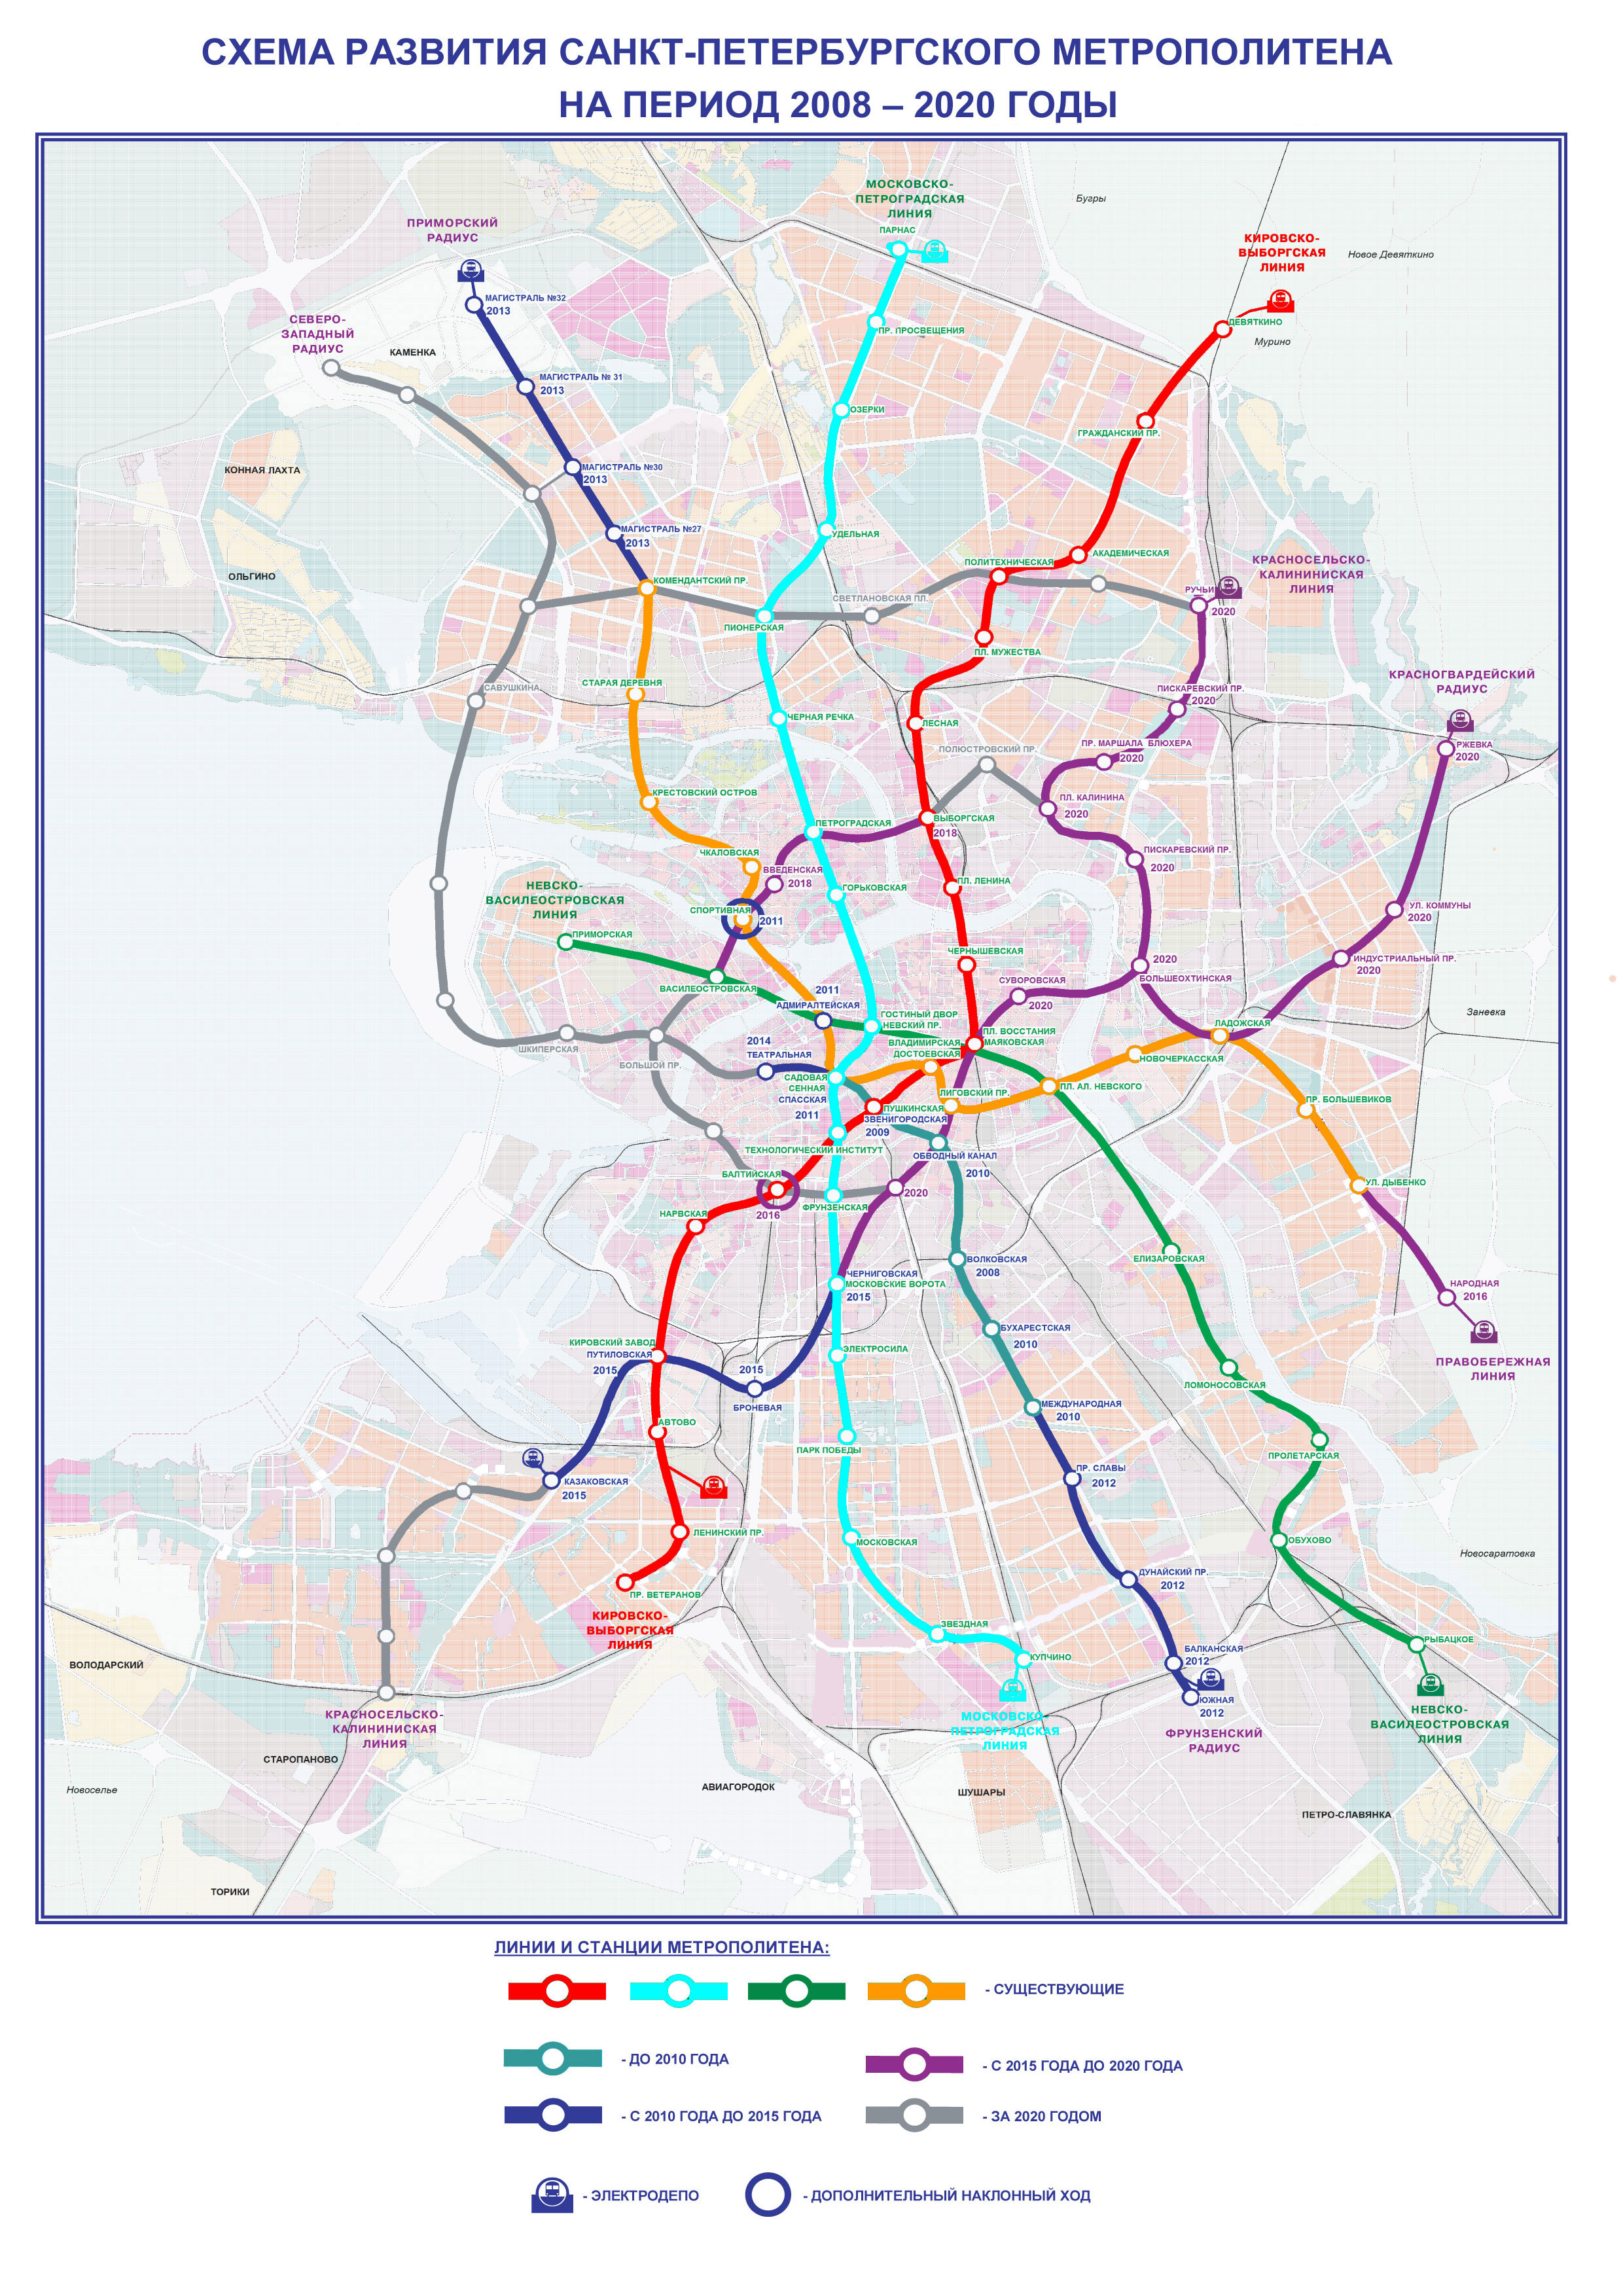 Petrohrad — Metro — Maps of Projects